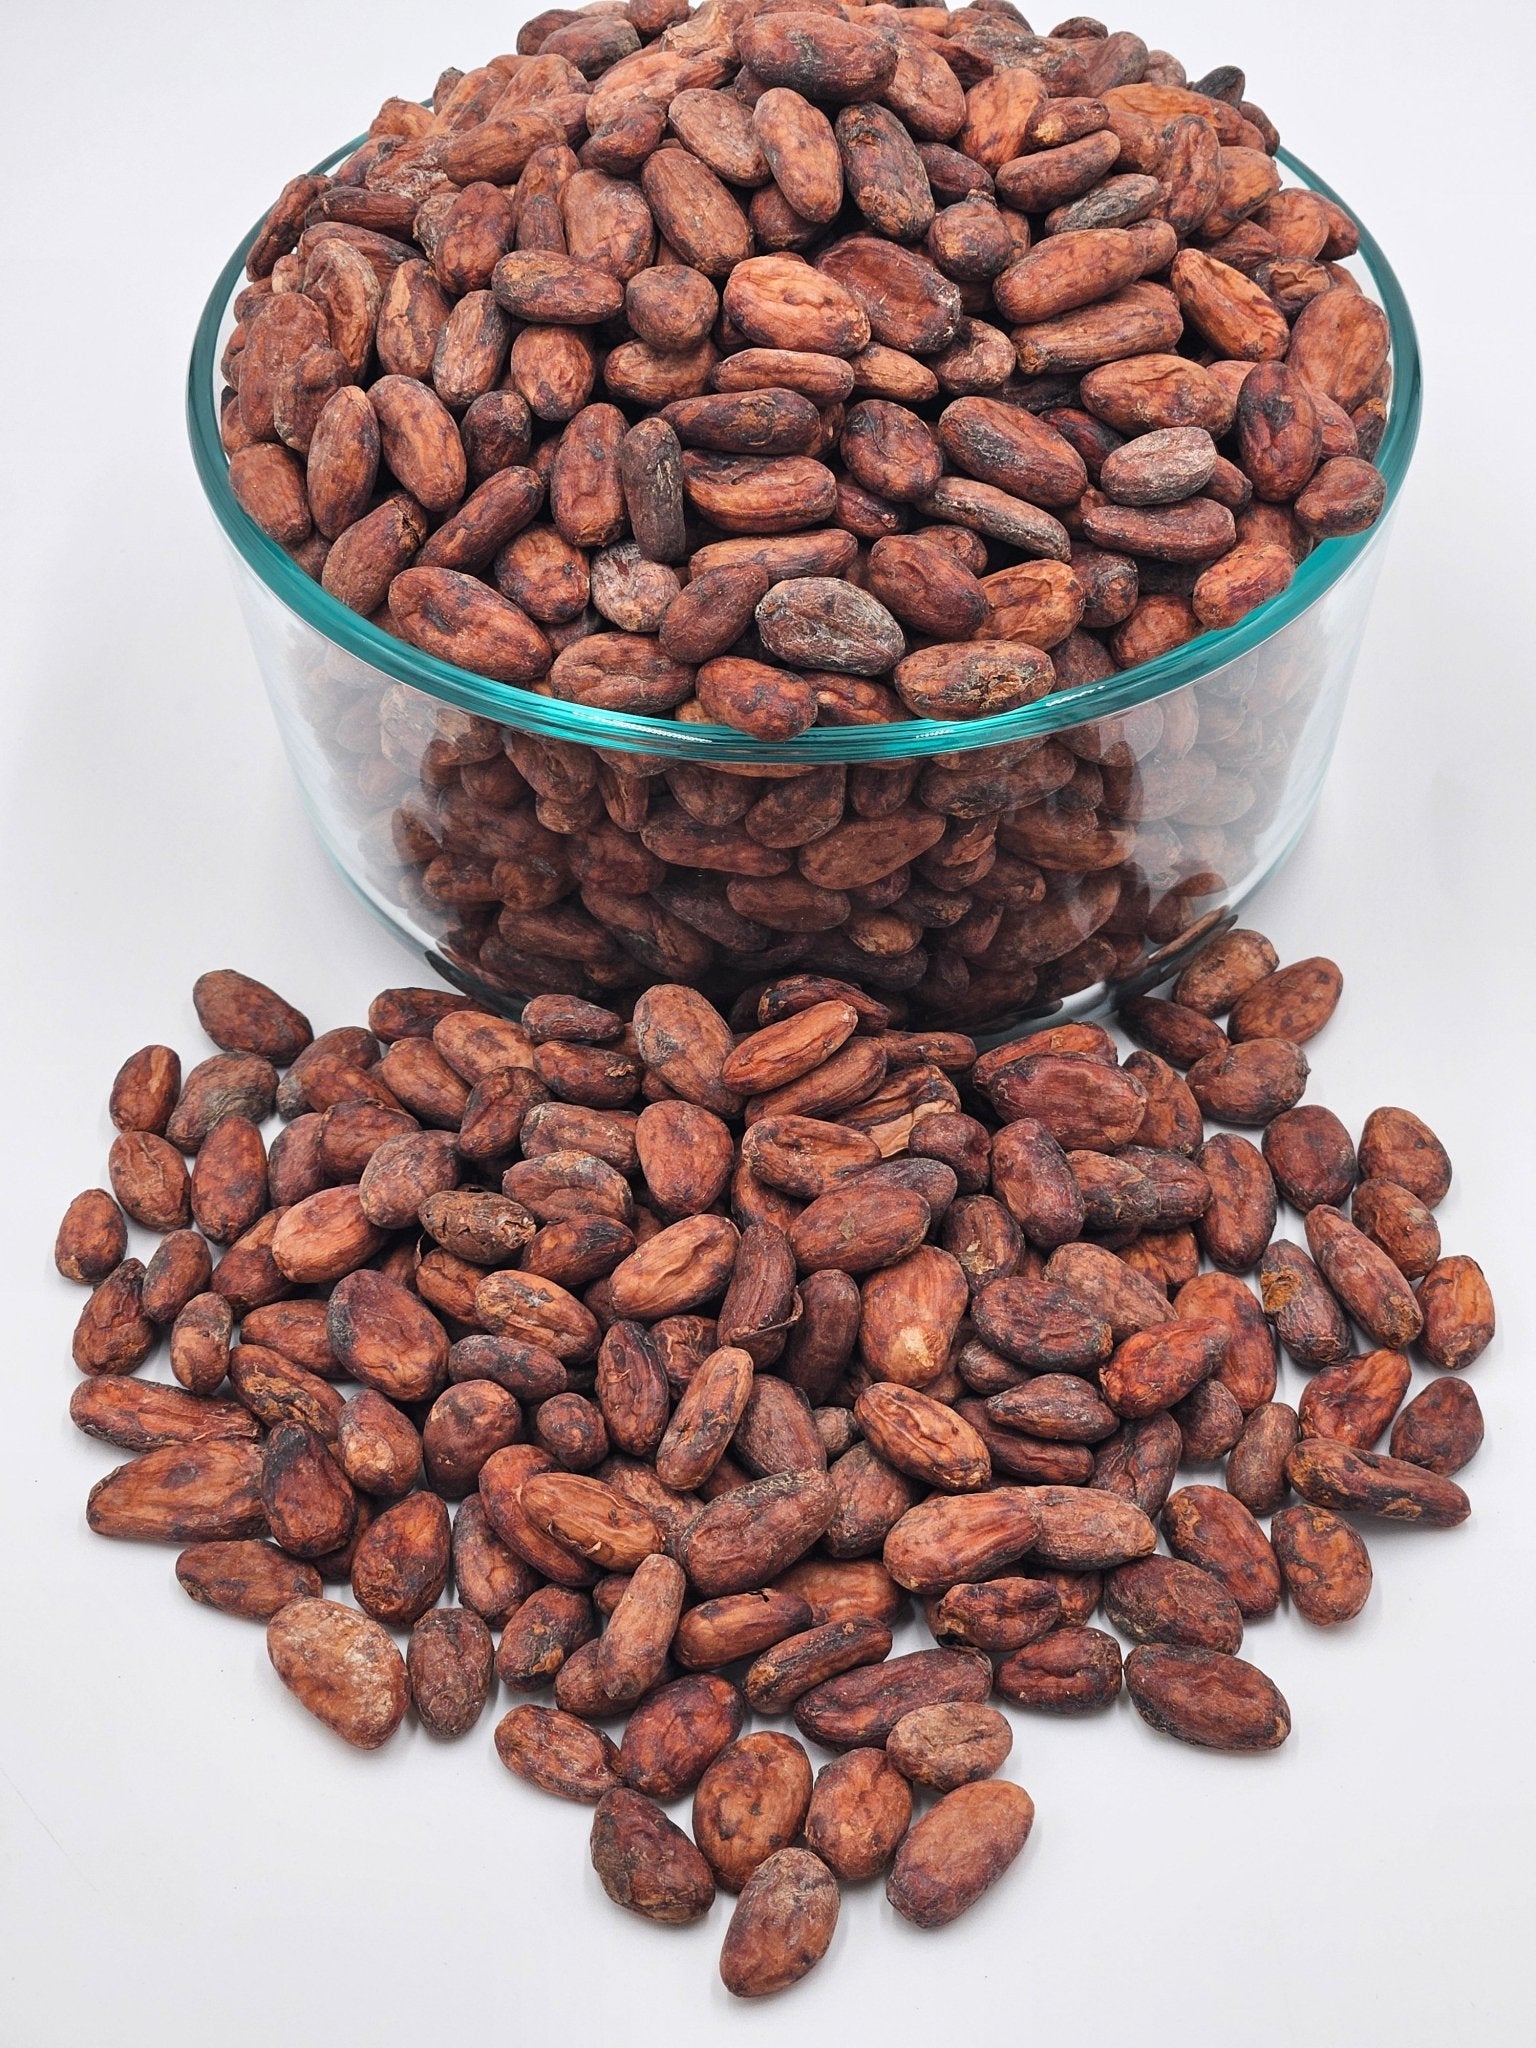 ***【3 Pack】- Cacao Beans 16 oz - Natural Zing